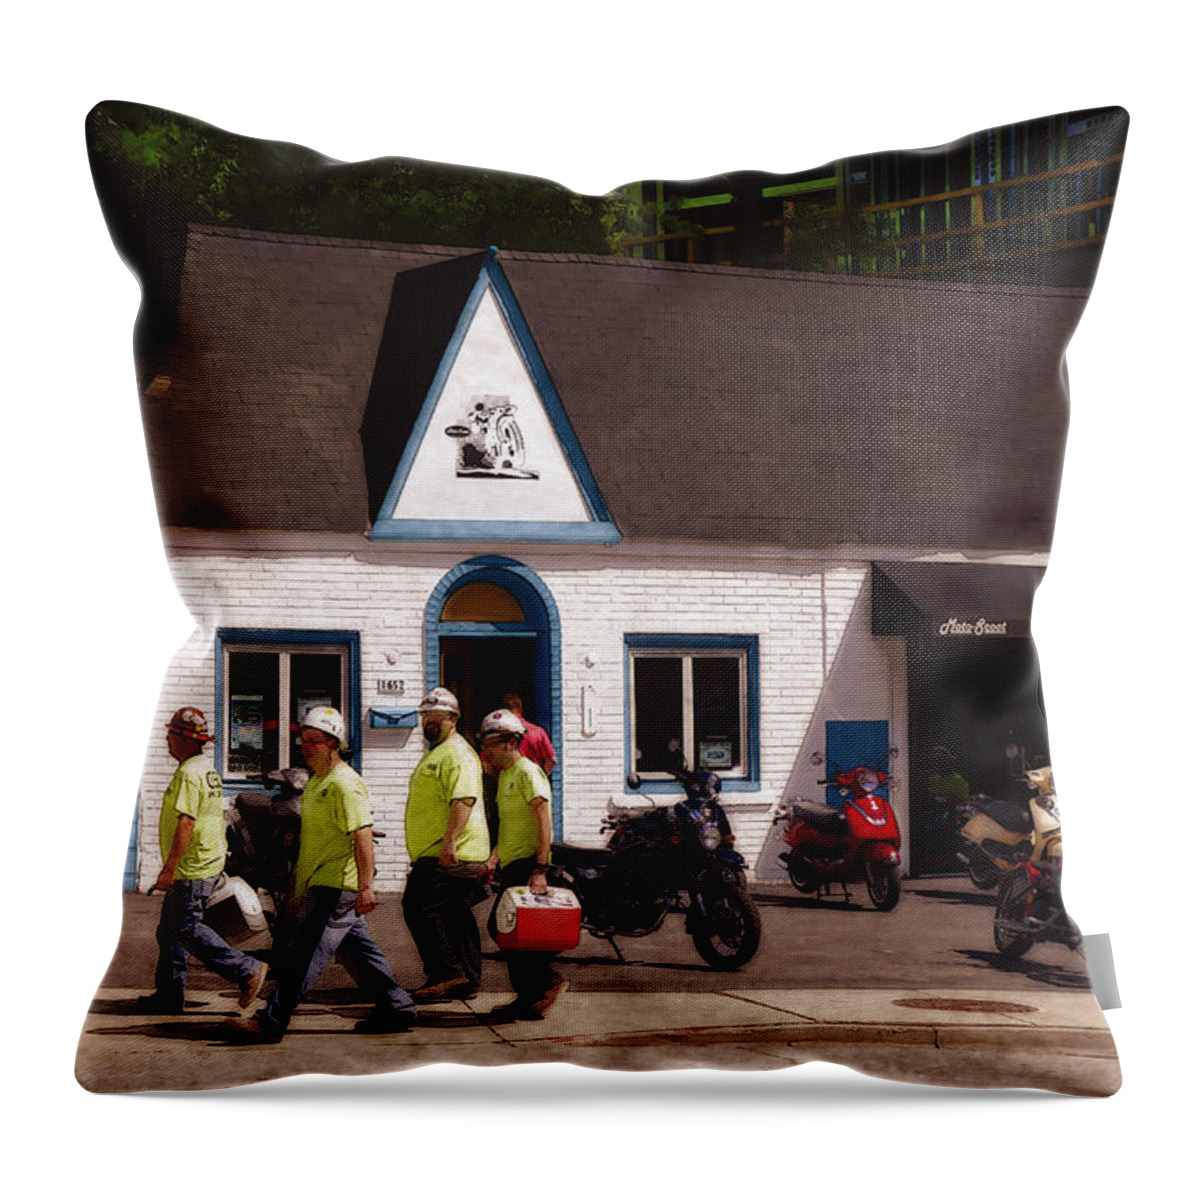 City Throw Pillow featuring the digital art Quitting Time by David Blank